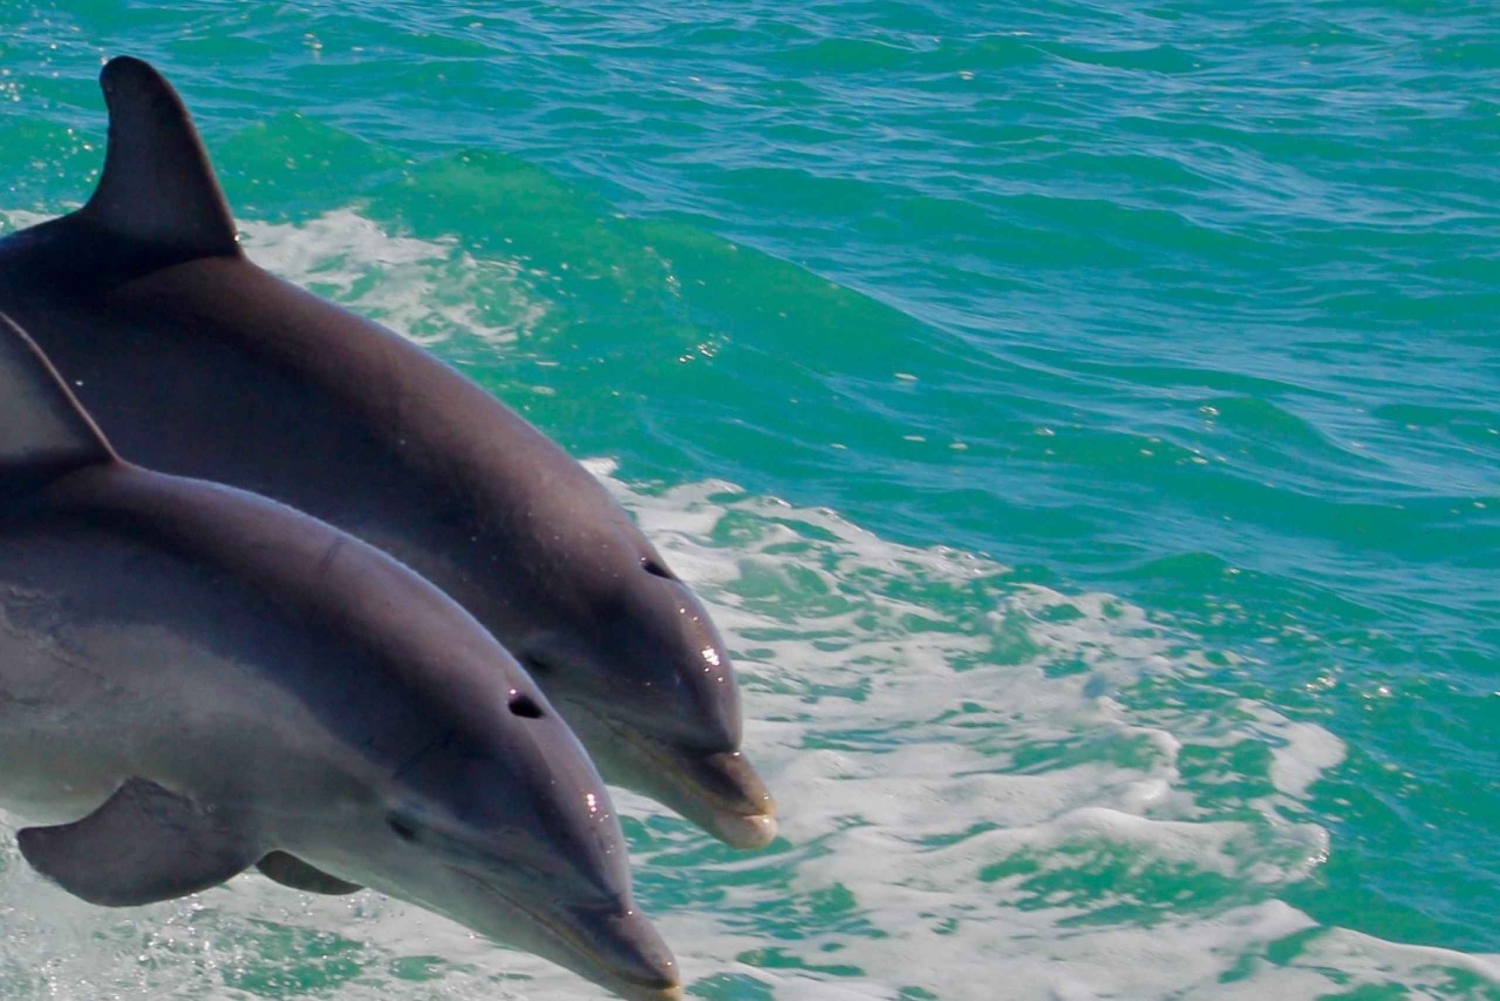 Lisbon: Tagus River Dolphin Watching Boat Trip